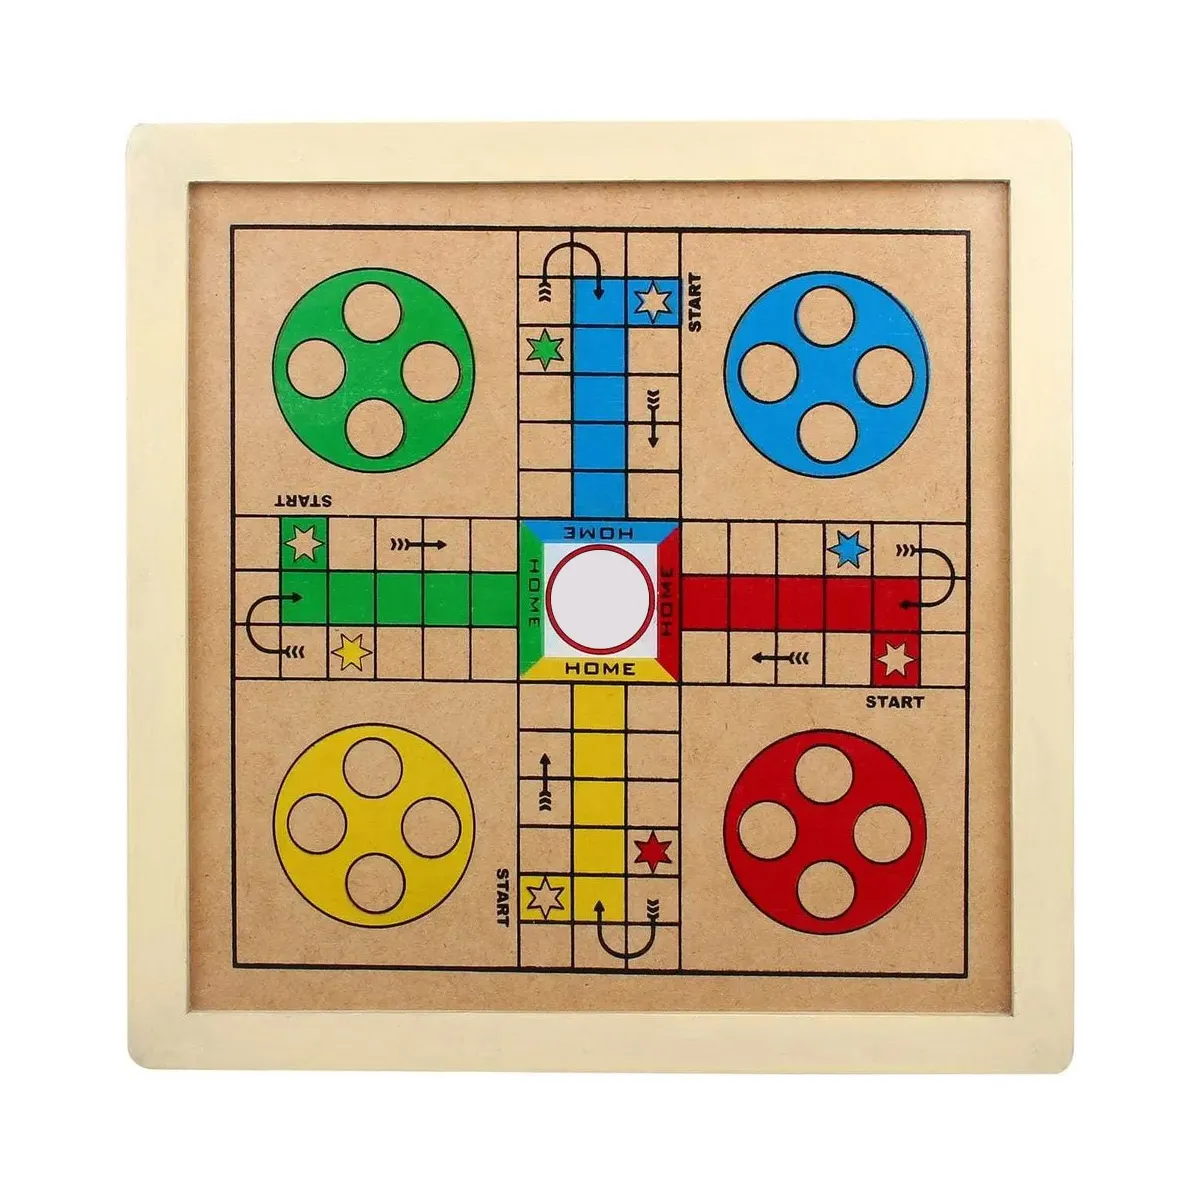 Top High Quality Wooden Ludo Board For Family In All Size 2023 New Design Simply Ludo Board Game In Low MOQ